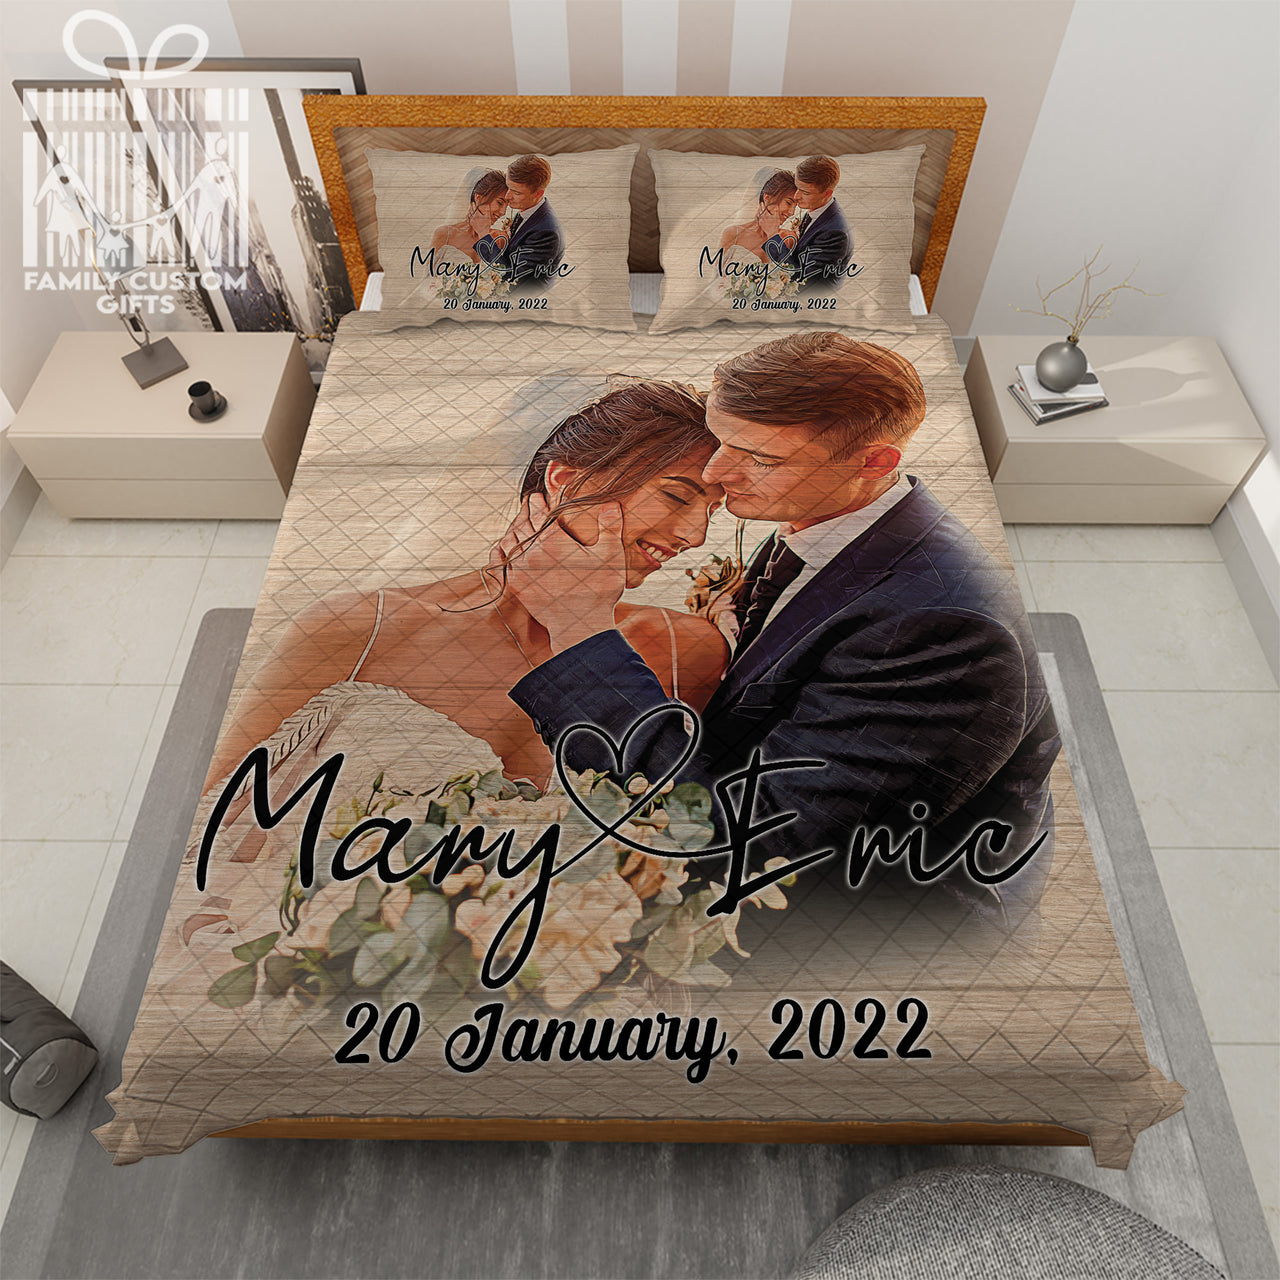 Custom Quilt Sets Wedding Anniversary Gift Gifts for Couple Personalized Quilt Bedding Men Women